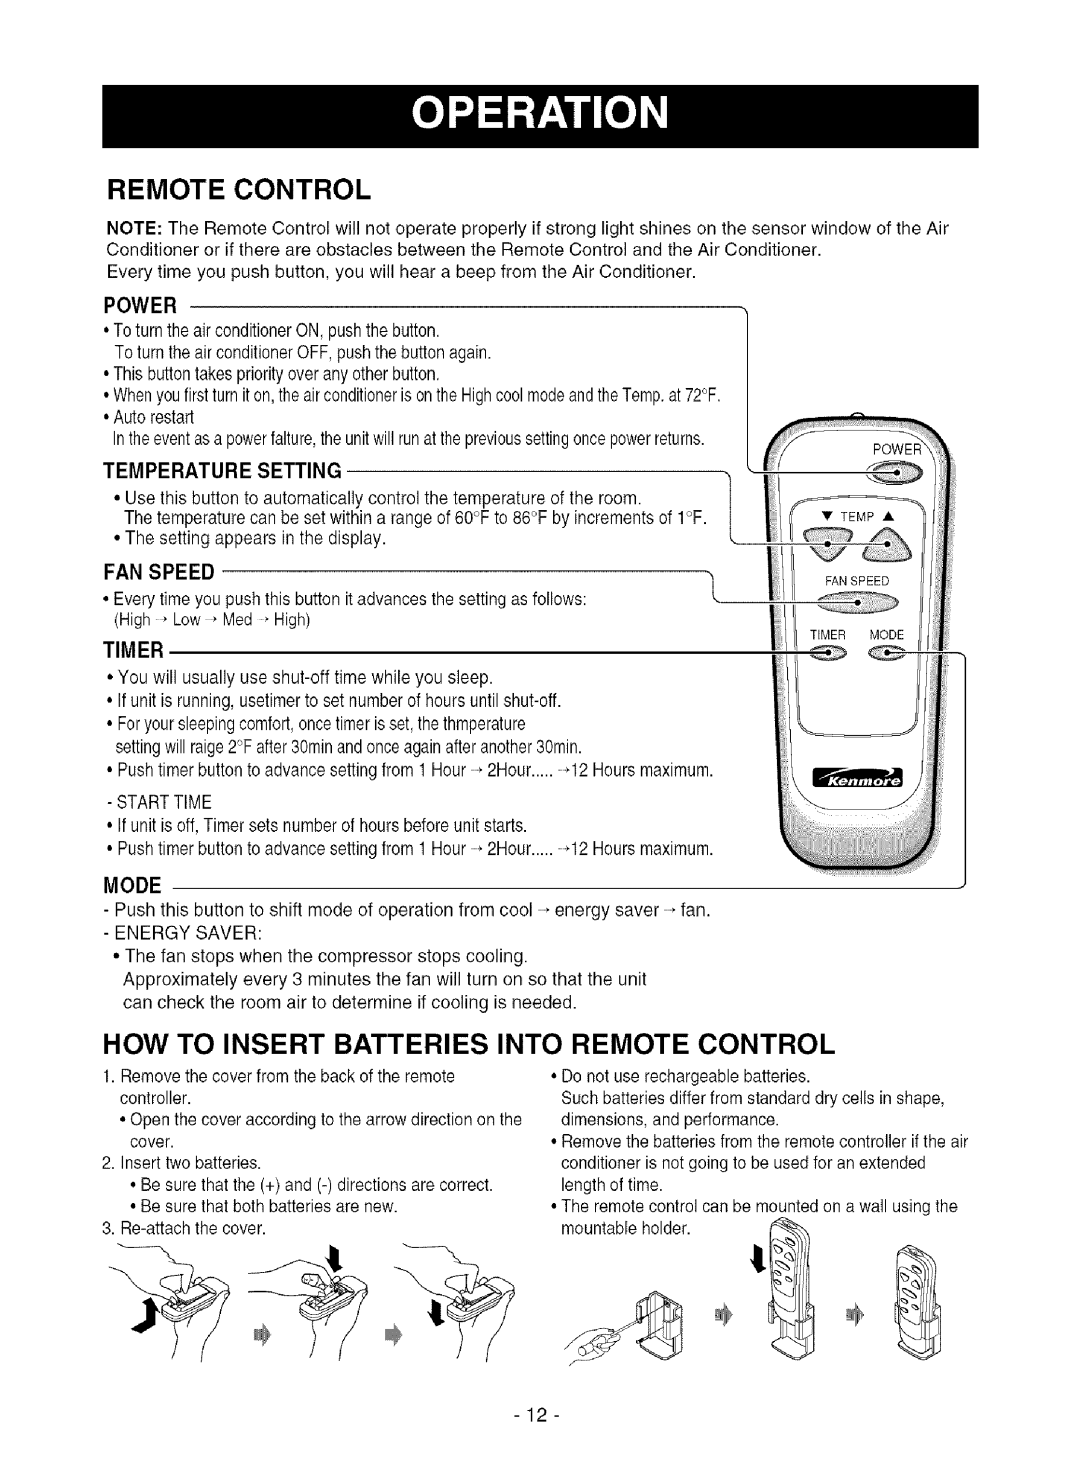 Kenmore 580.75281 owner manual How To Insert Batteries Into Remote Control, Timer, Mode 